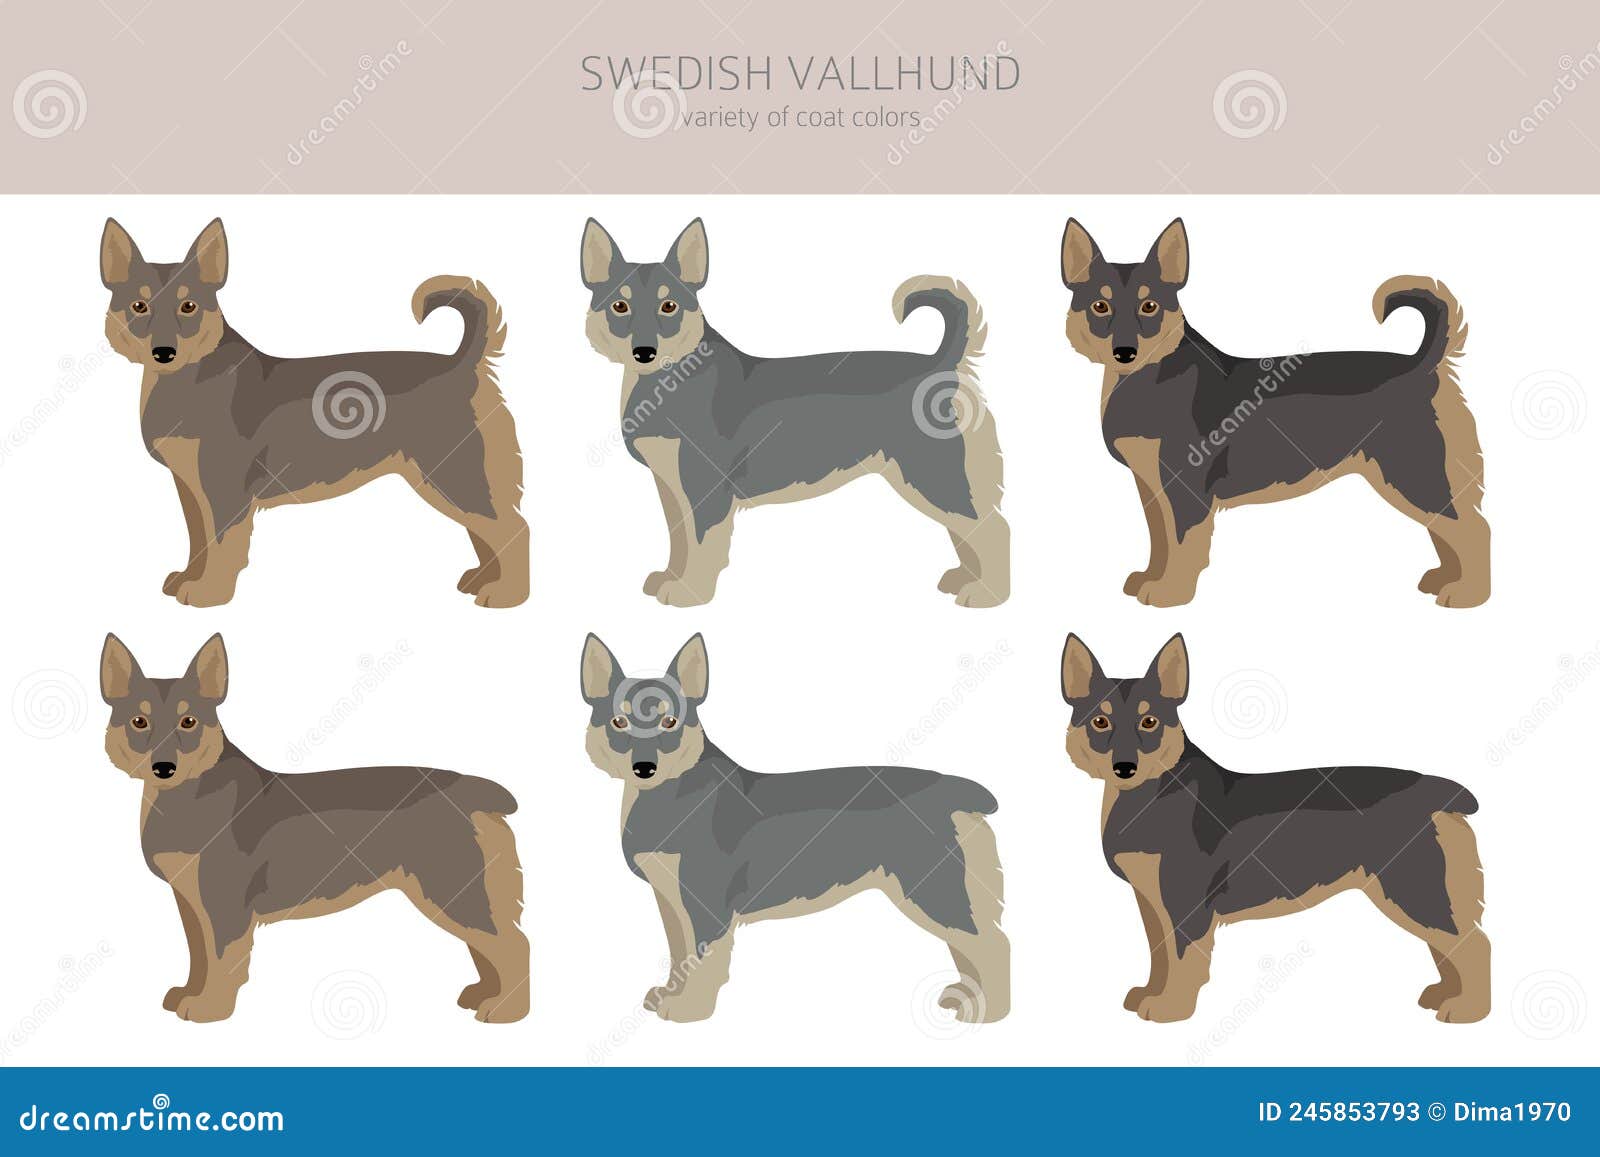 Swedish Vallhund Coat Colors, Different Poses Clipart Stock Vector - of funny, coloring: 245853793